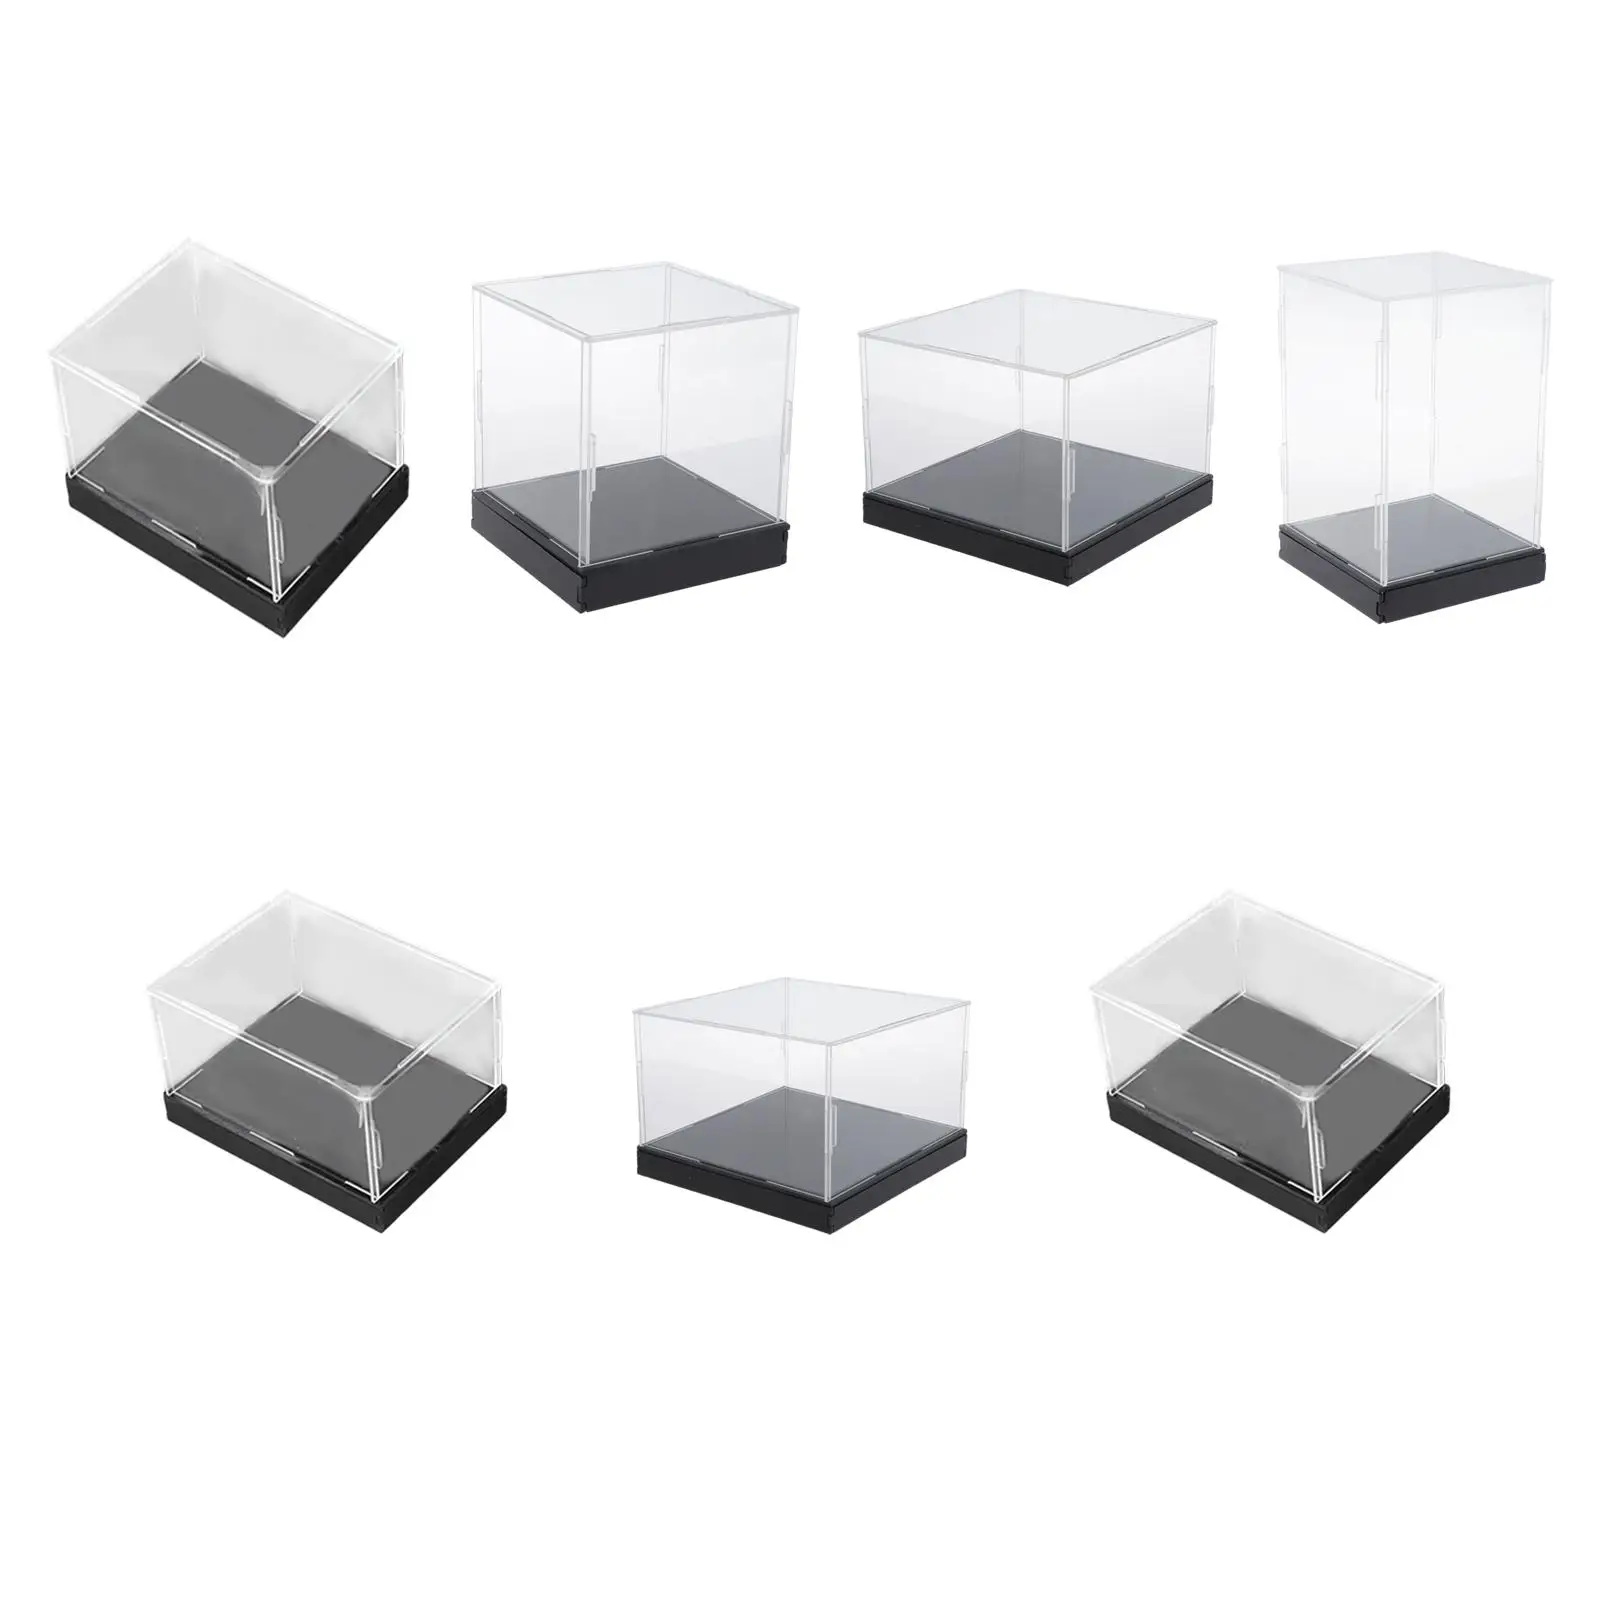 Transparent Acrylic Display Box Black Base Multipurpose Dustproof Container for Souvenirs Cosmetics Model Collectibles Showcase